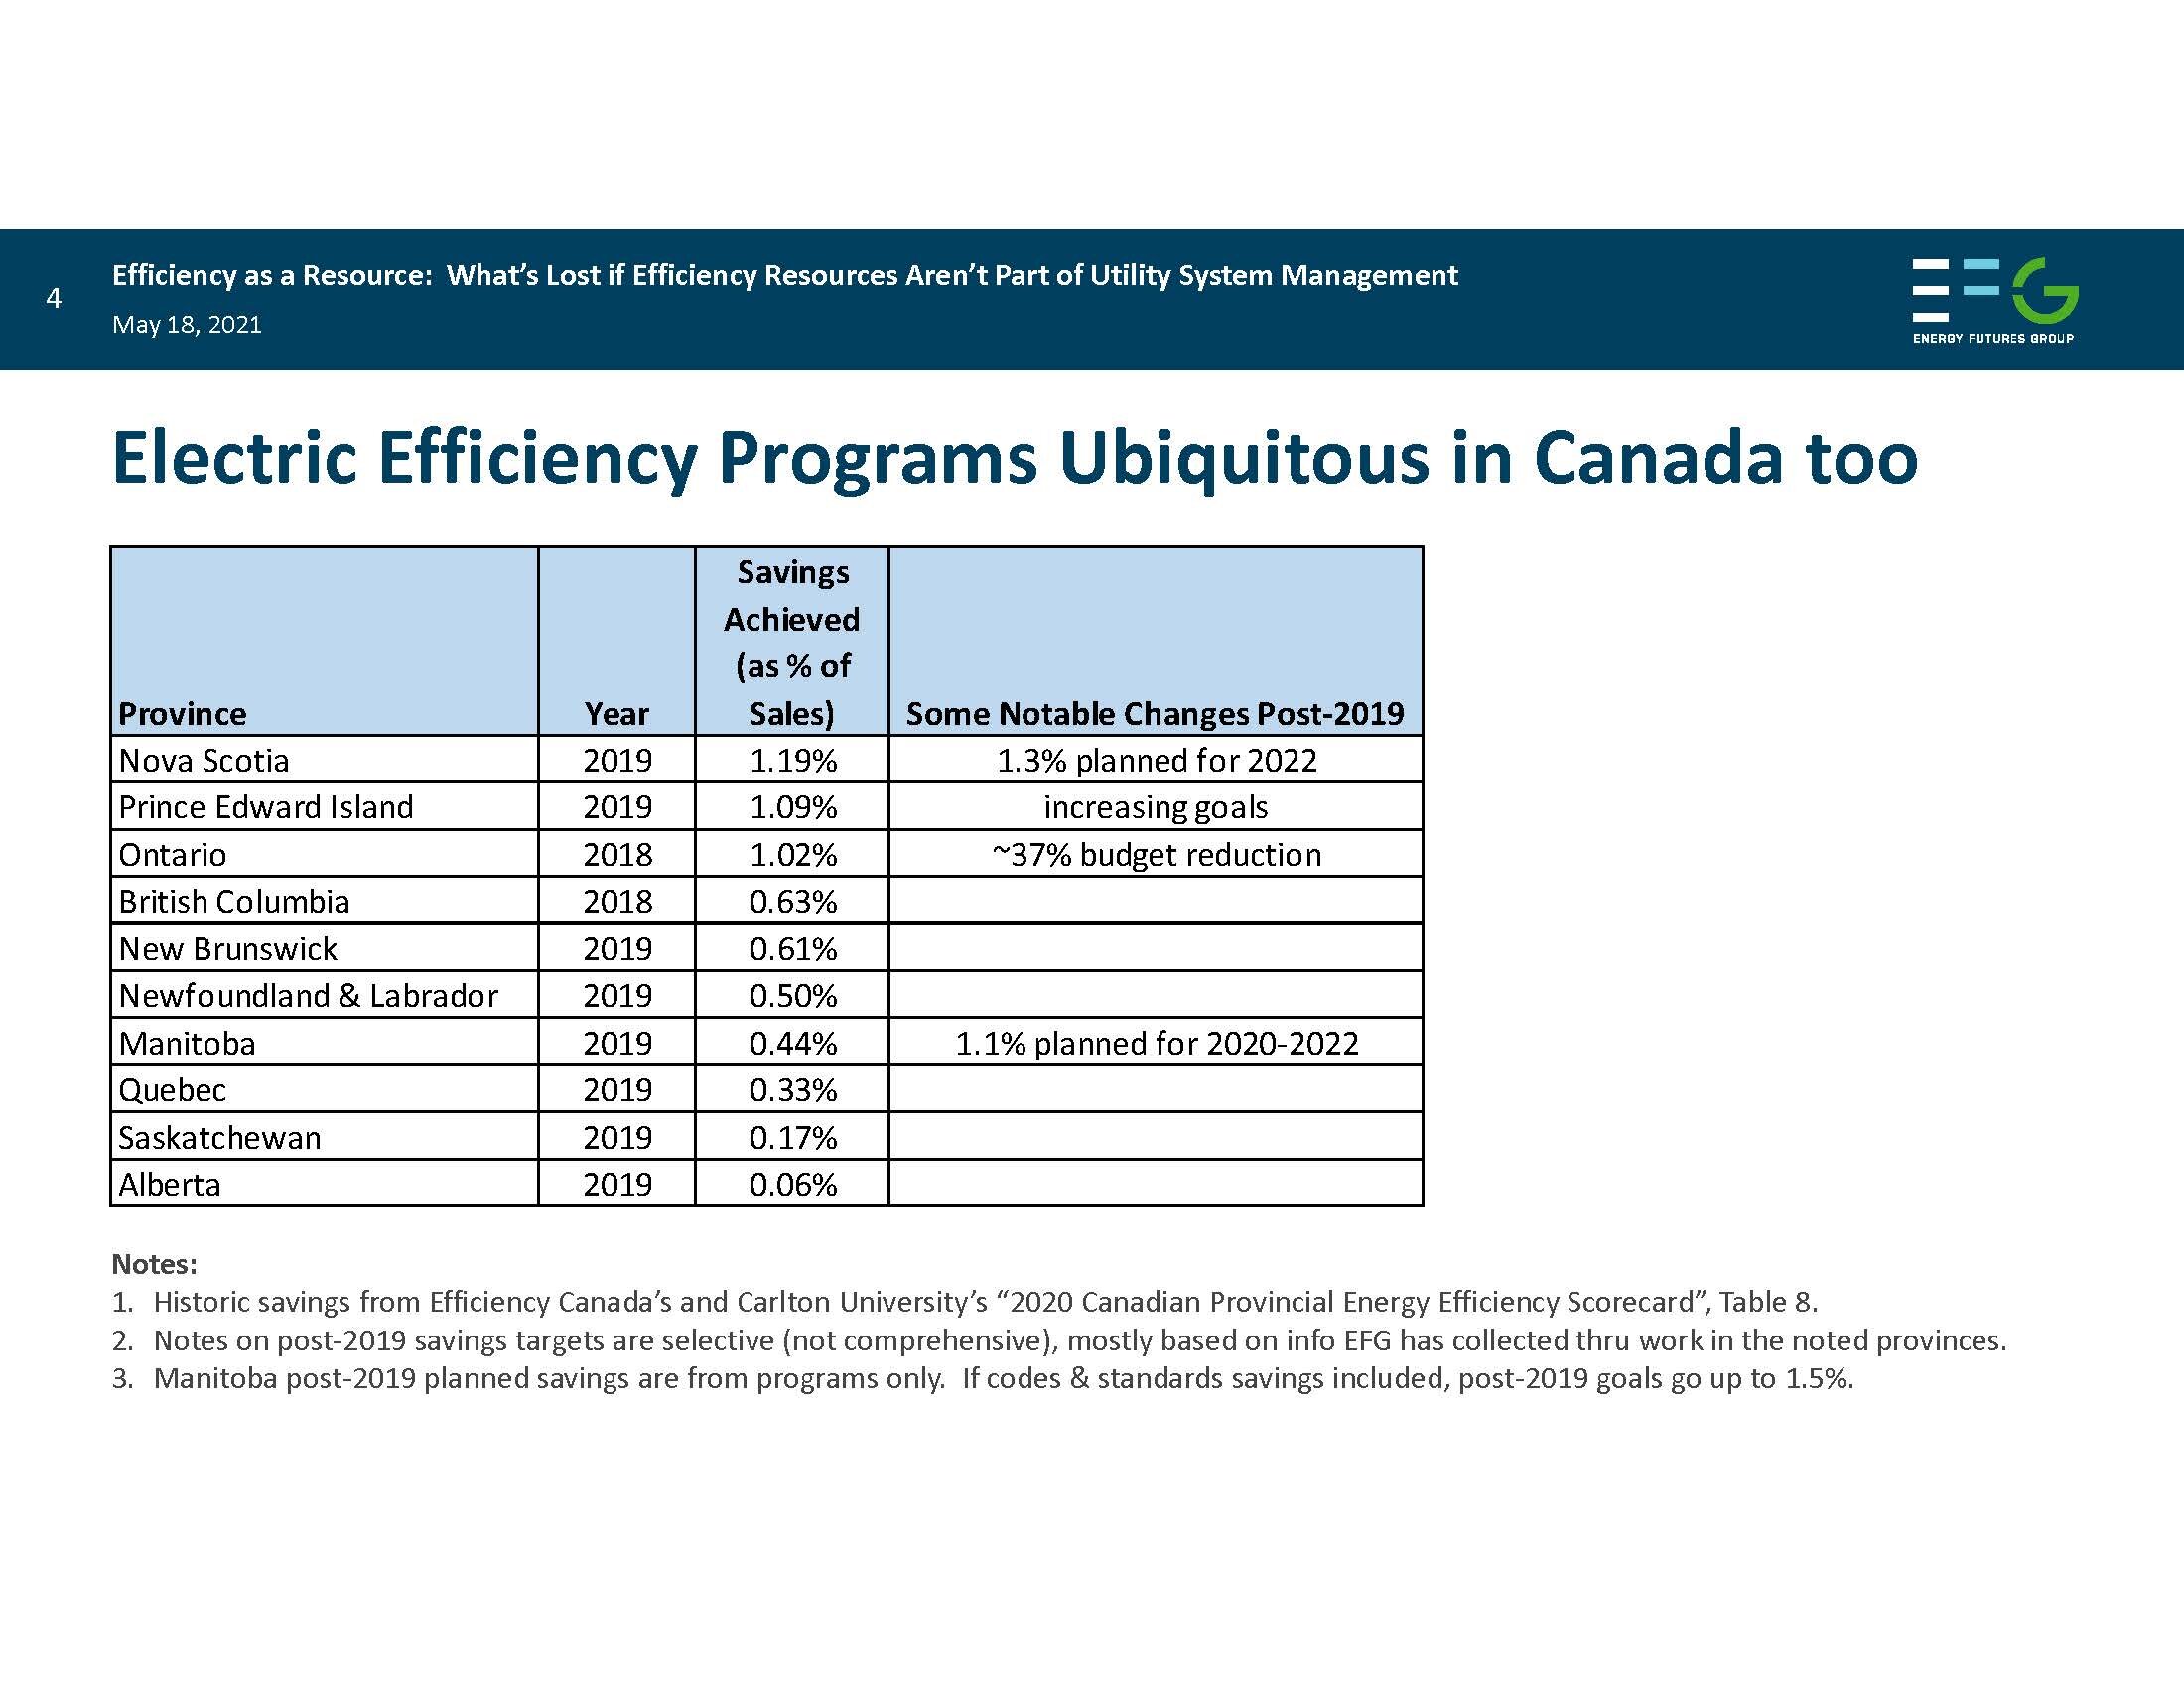 Energy Efficiency as a Resource Chris Neme Energy Futures_Page_04.jpg